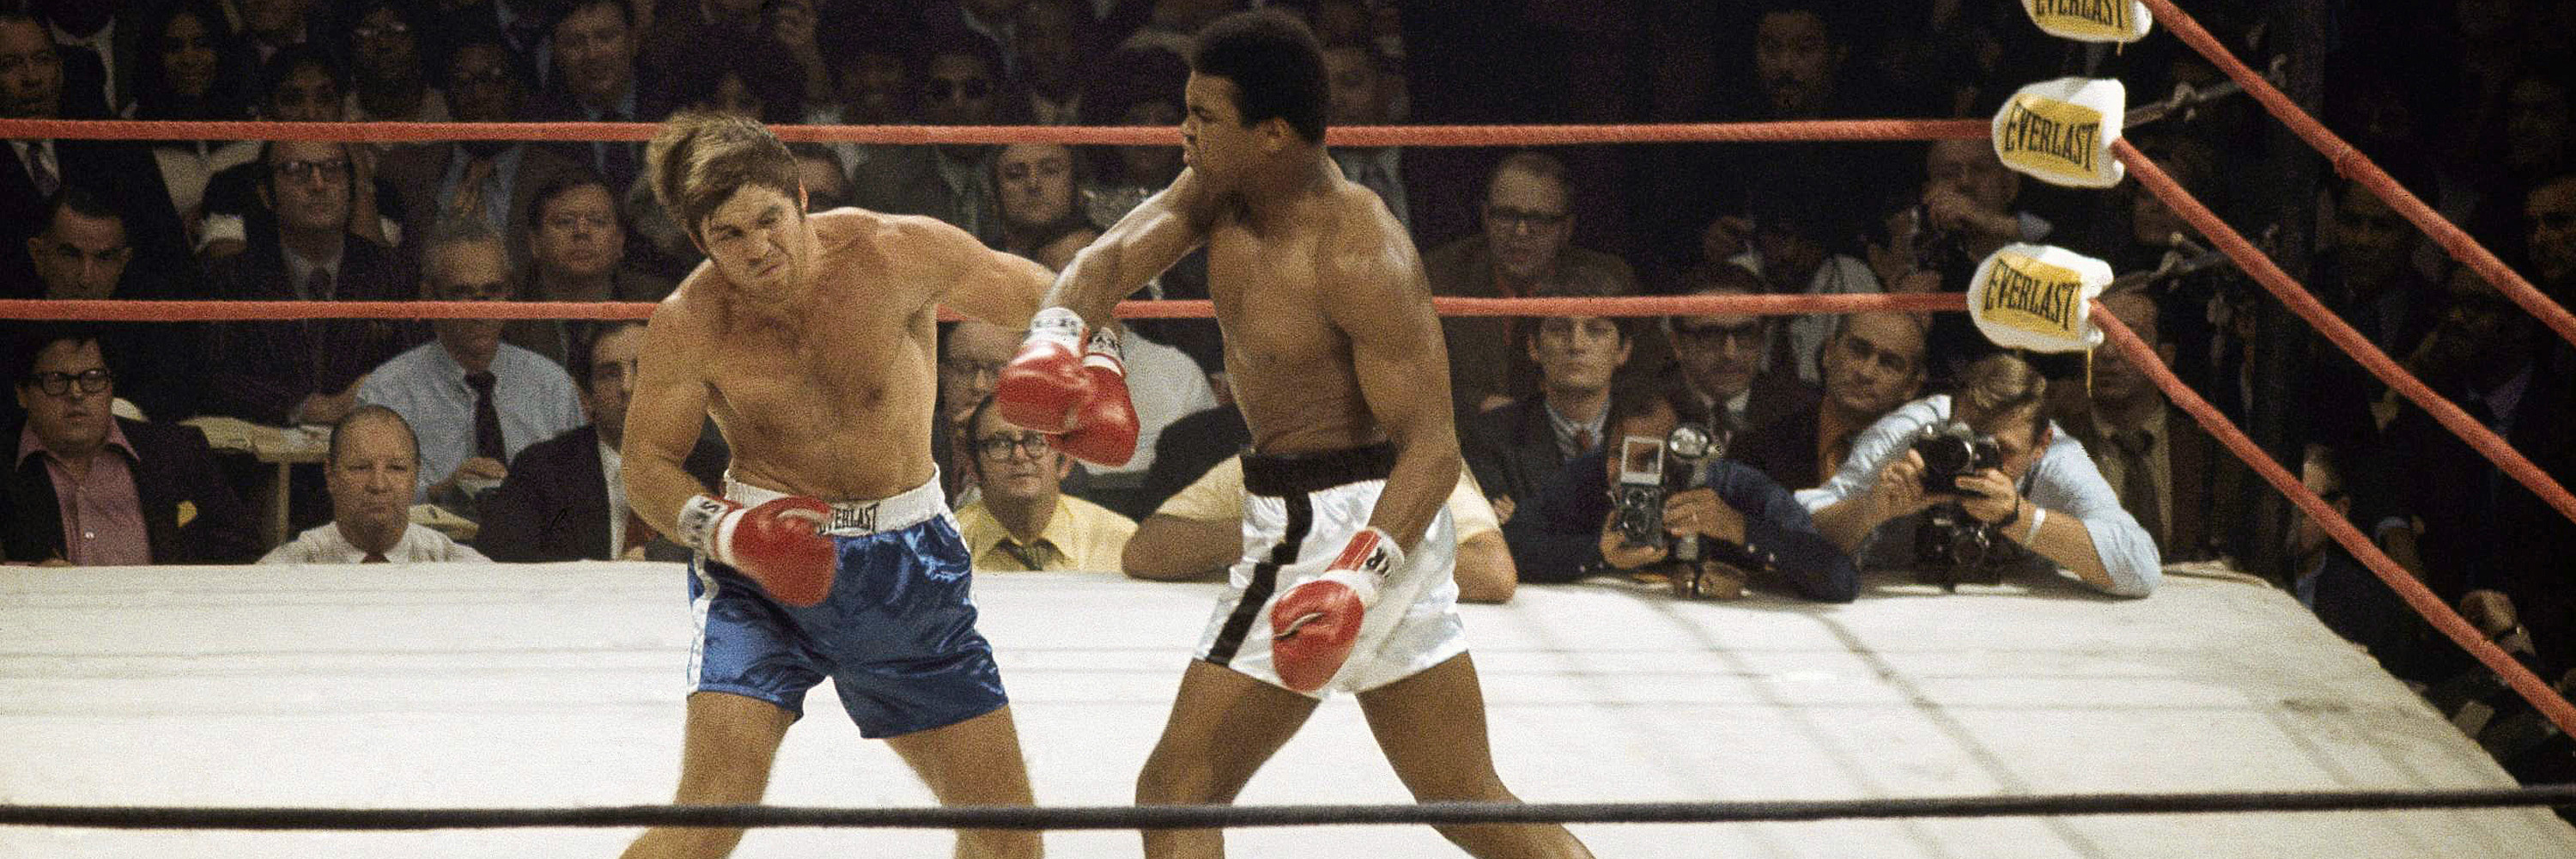 On Thursday, “Closer Look” takes a look at Muhammad Ali, right, returning to the ring to fight Jerry Quarry on Oct. 26, 1970 – right here in Atlanta. (Joe Holloway Jr./Associated Press file)